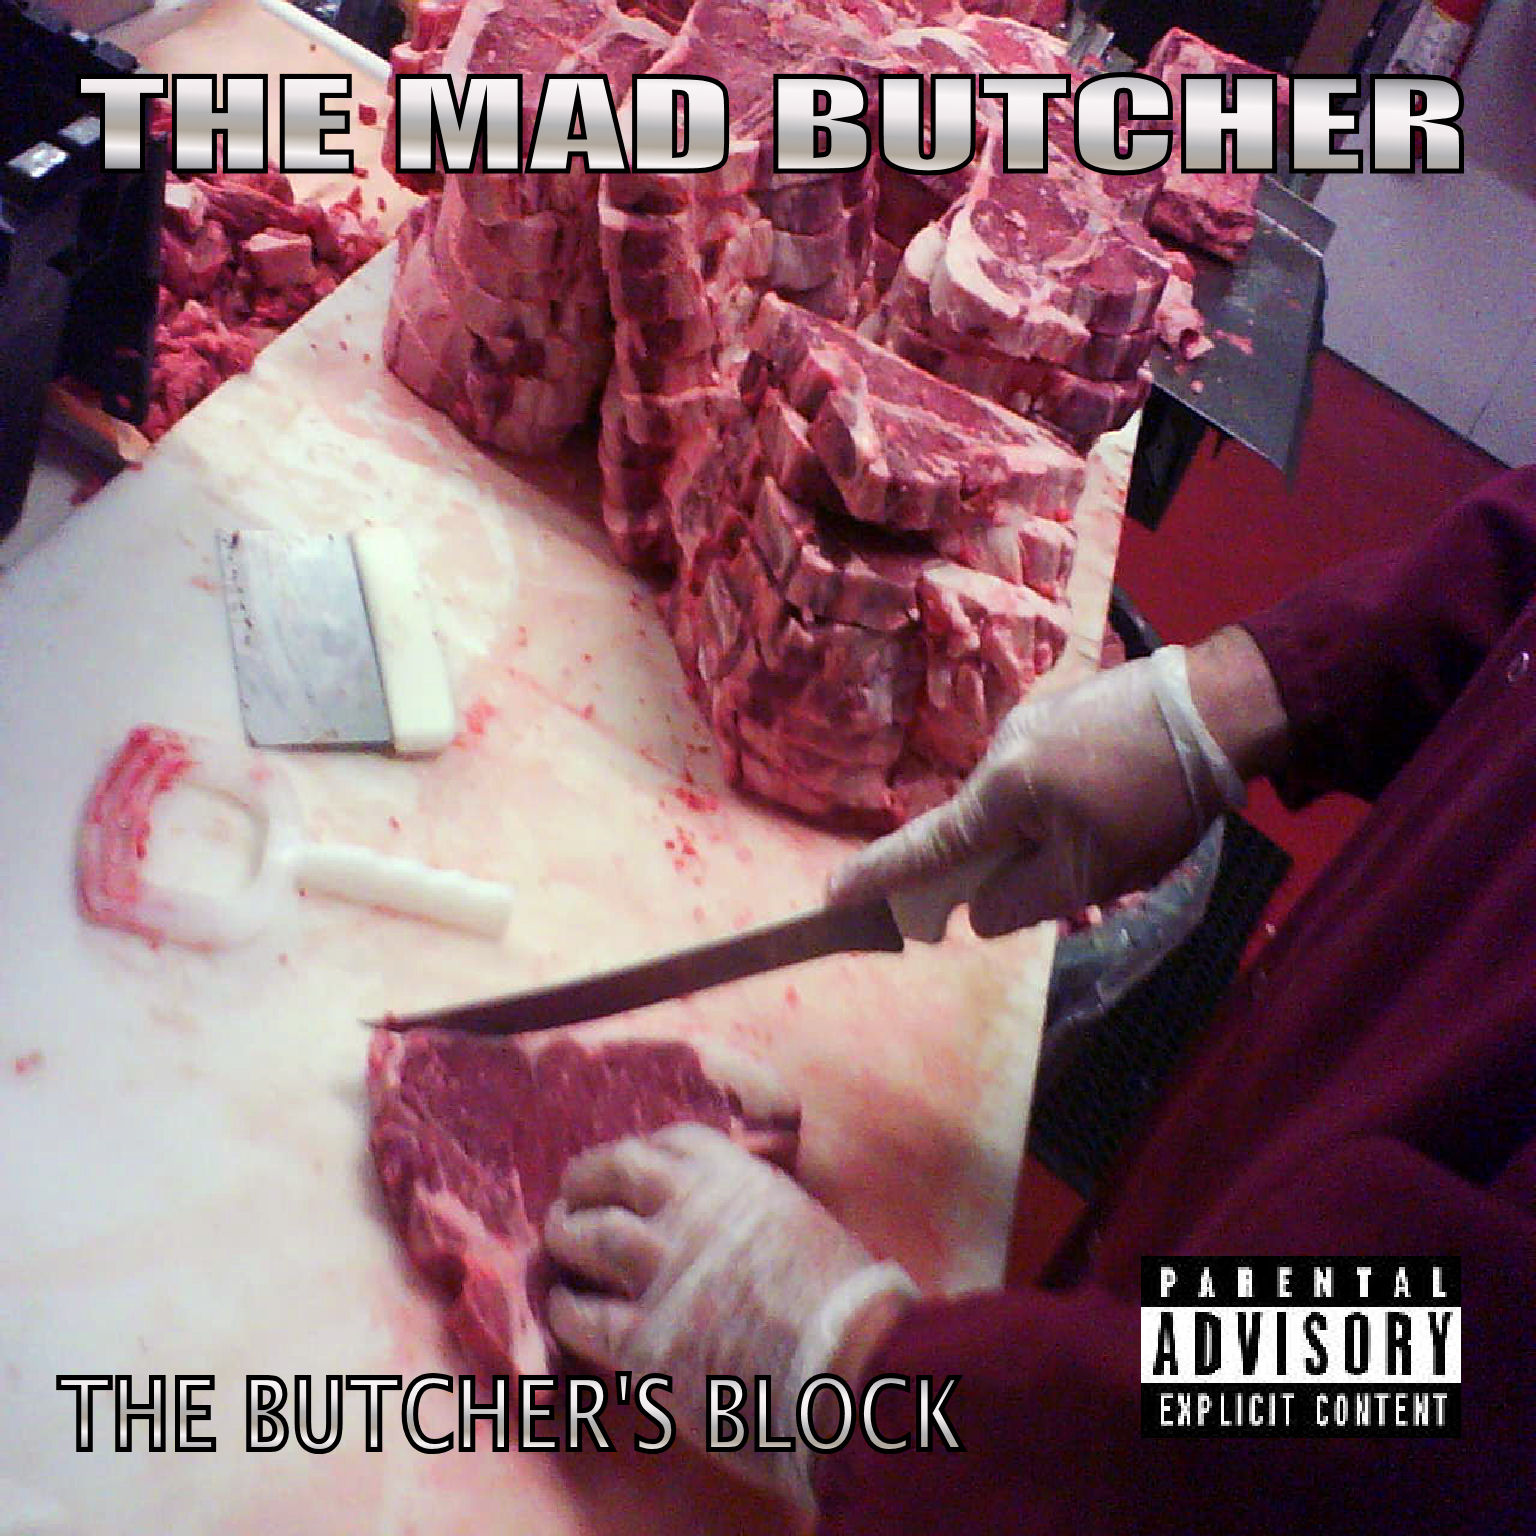 Detroit Music from Ken the MAD BUTCHER